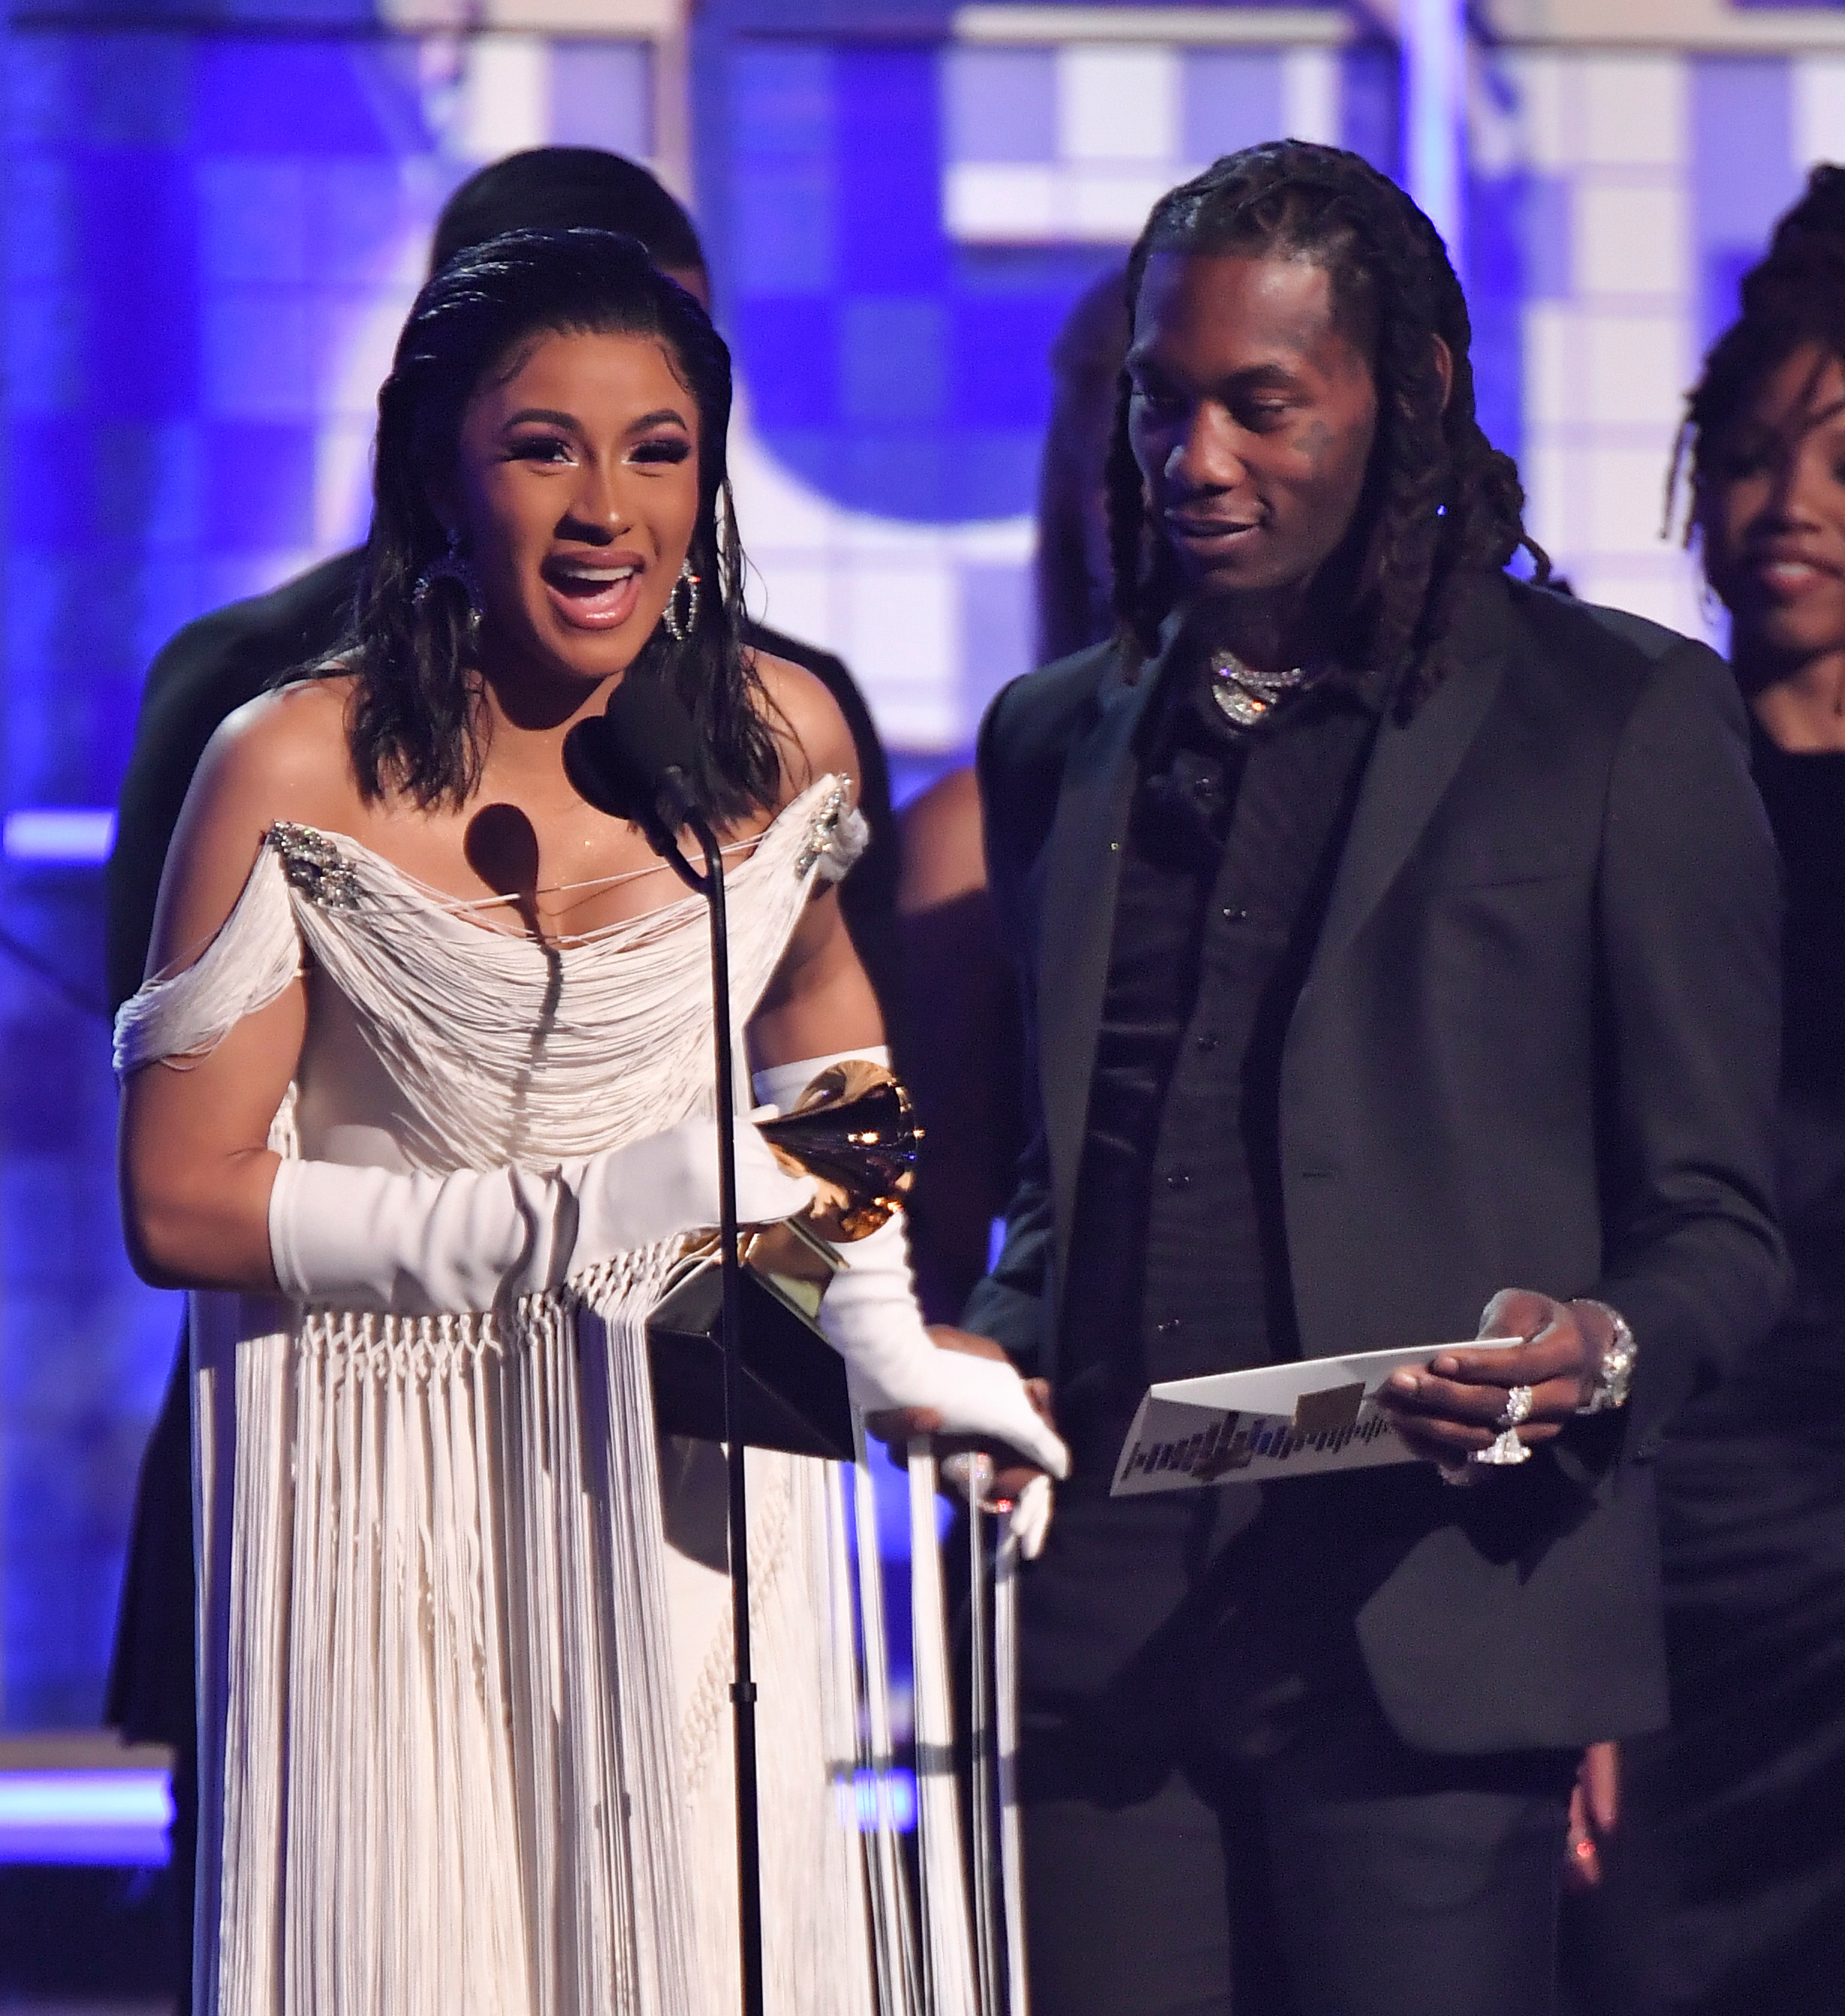 <p>Cardi B <a href="https://www.wonderwall.com/awards-events/grammys/2019-grammy-awards-whats-buzzing-what-everyones-talking-about-trending-3018395.gallery?photoId=1047342">made history</a> at the <a href="https://www.wonderwall.com/awards-events/red-carpet/2019-grammy-awards-see-all-photos-red-carpet-3018389.gallery">2019 Grammy Awards</a> when she won the best rap album prize for her debut album, "Invasion of Privacy." Lauryn Hill was the first and until then only woman to claim the award (she won the prize in 1997 as part of hip-hop group the Fugees), but Cardi was the first solo female artist to take home the honor since the Recording Academy started handing it out in 1996.</p>